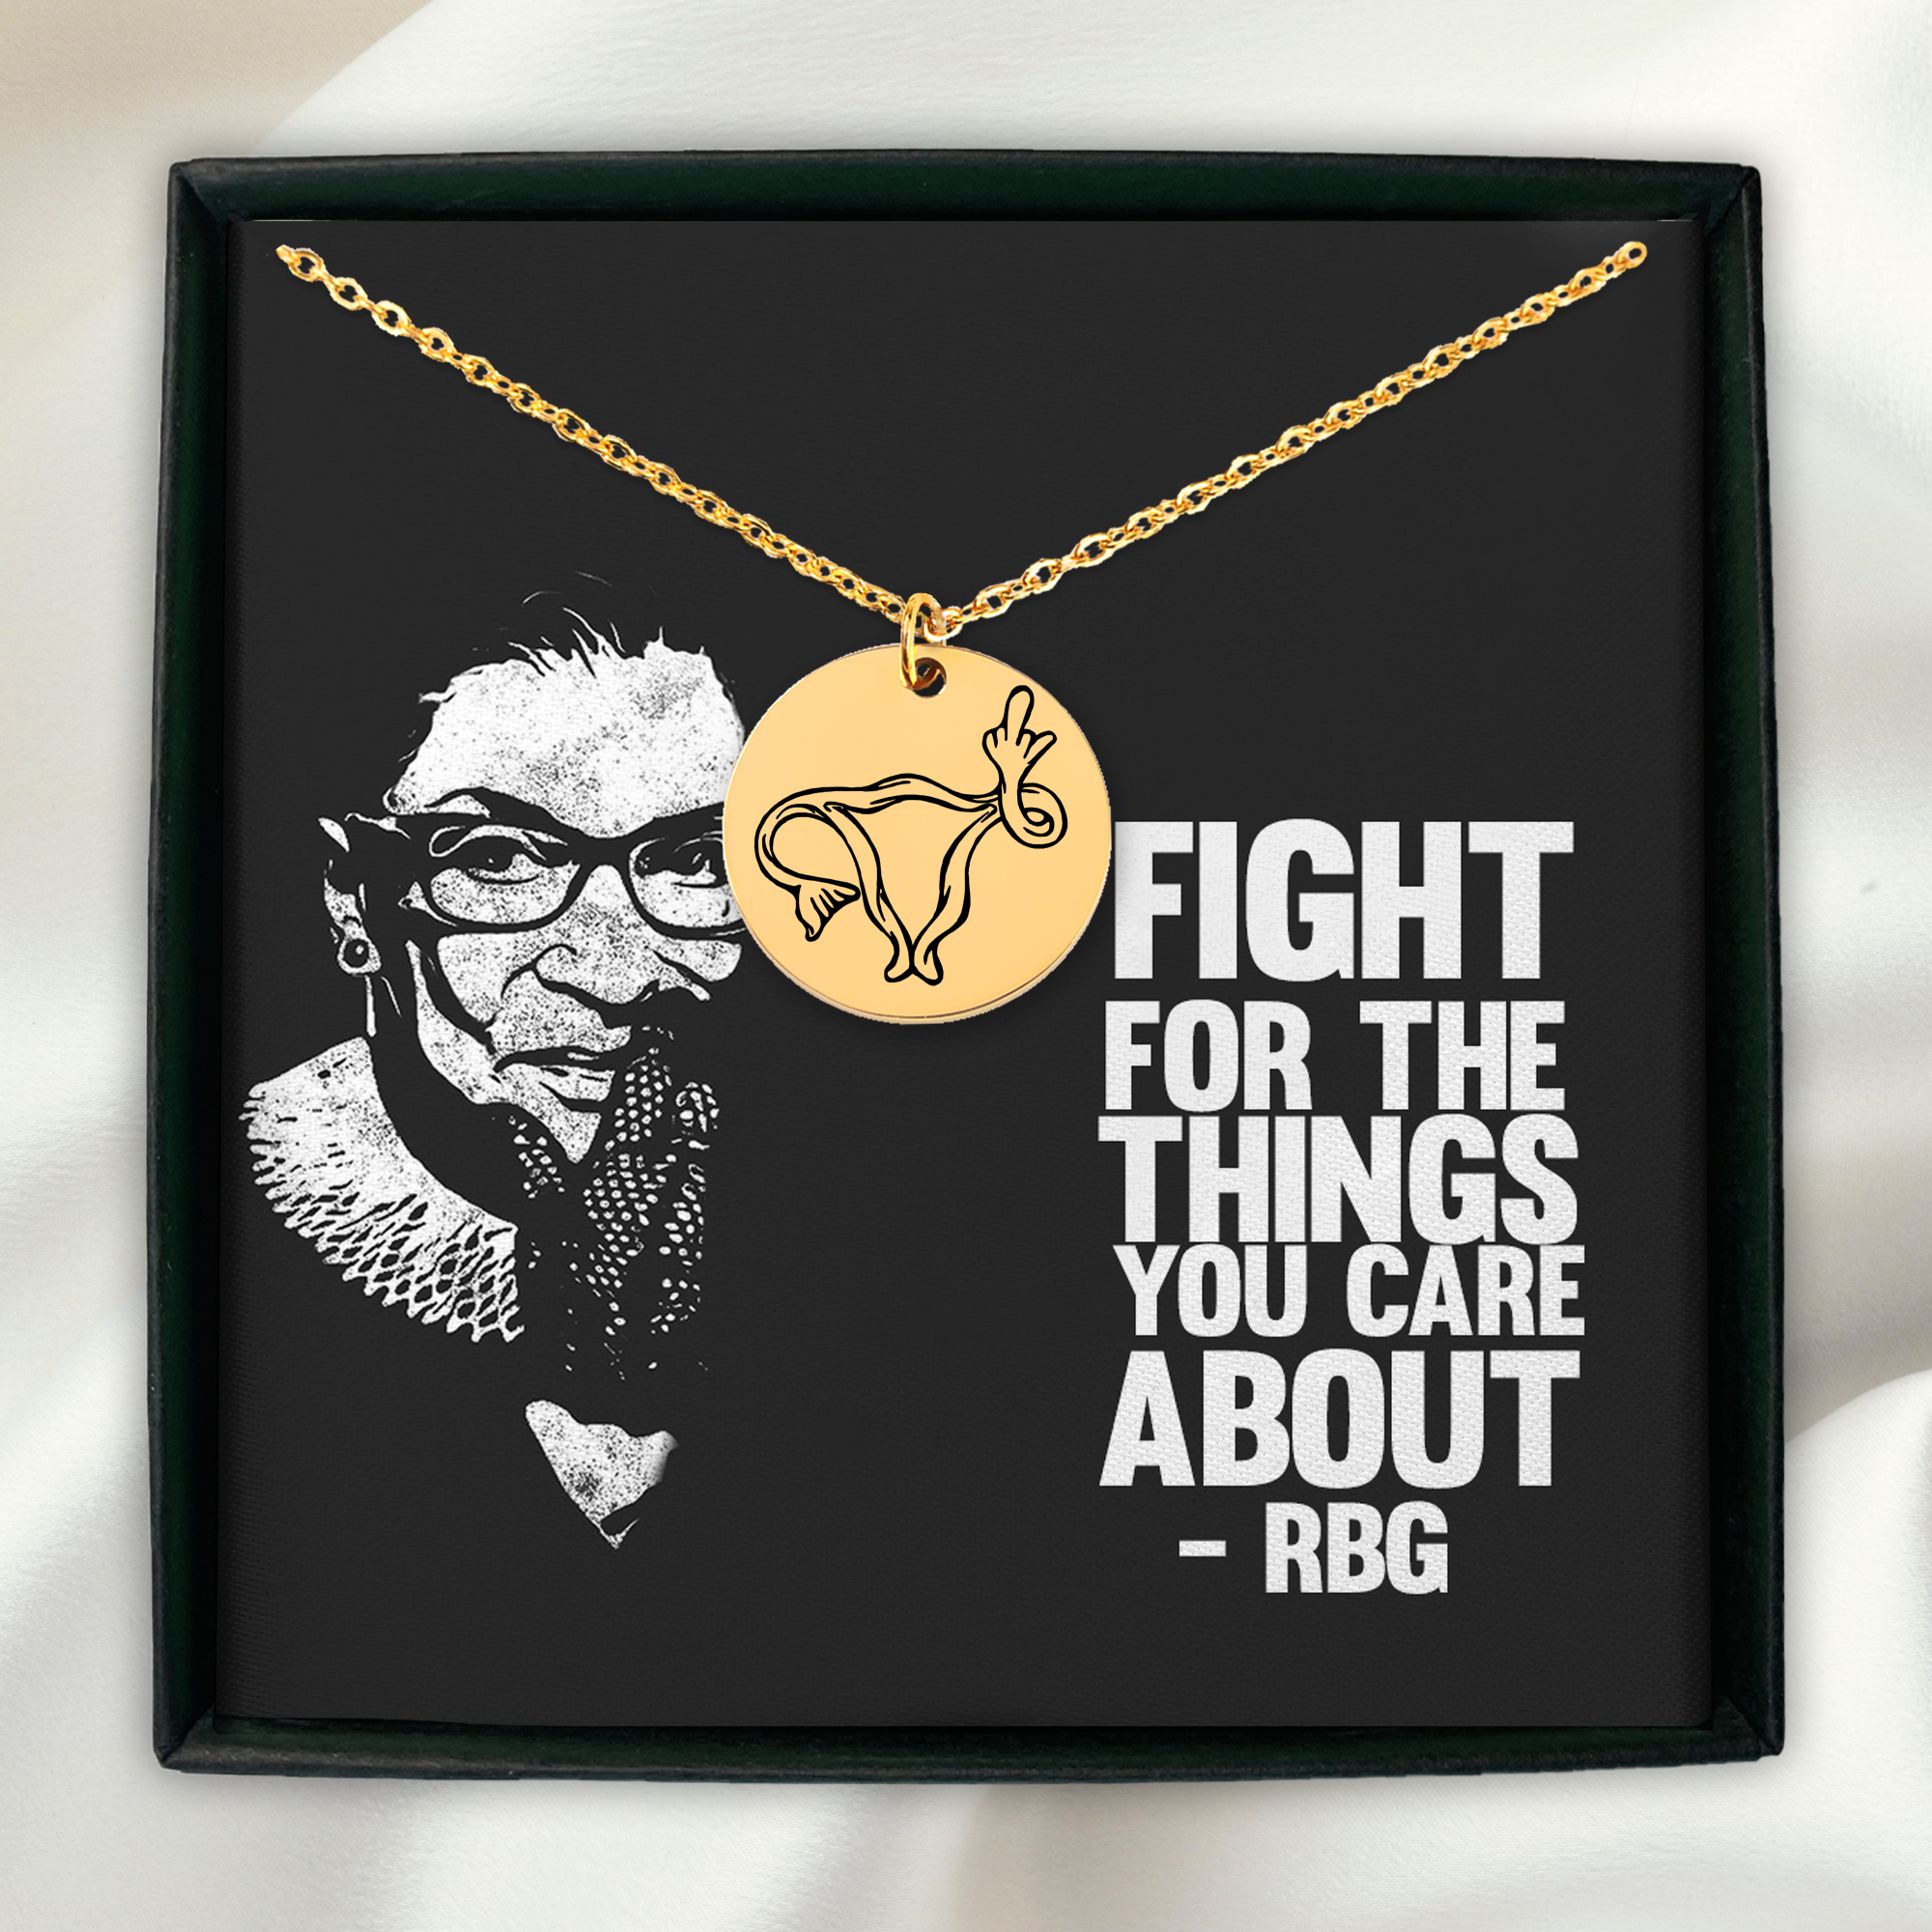 My Body My Choice Feminist Pro-Choice Necklace - Custom Uterus Jewelry - Rut Bader Ginsburg Message - Never Again Pendant - Girl Power Necklace - Women's Rightsn Design - Coin Necklace